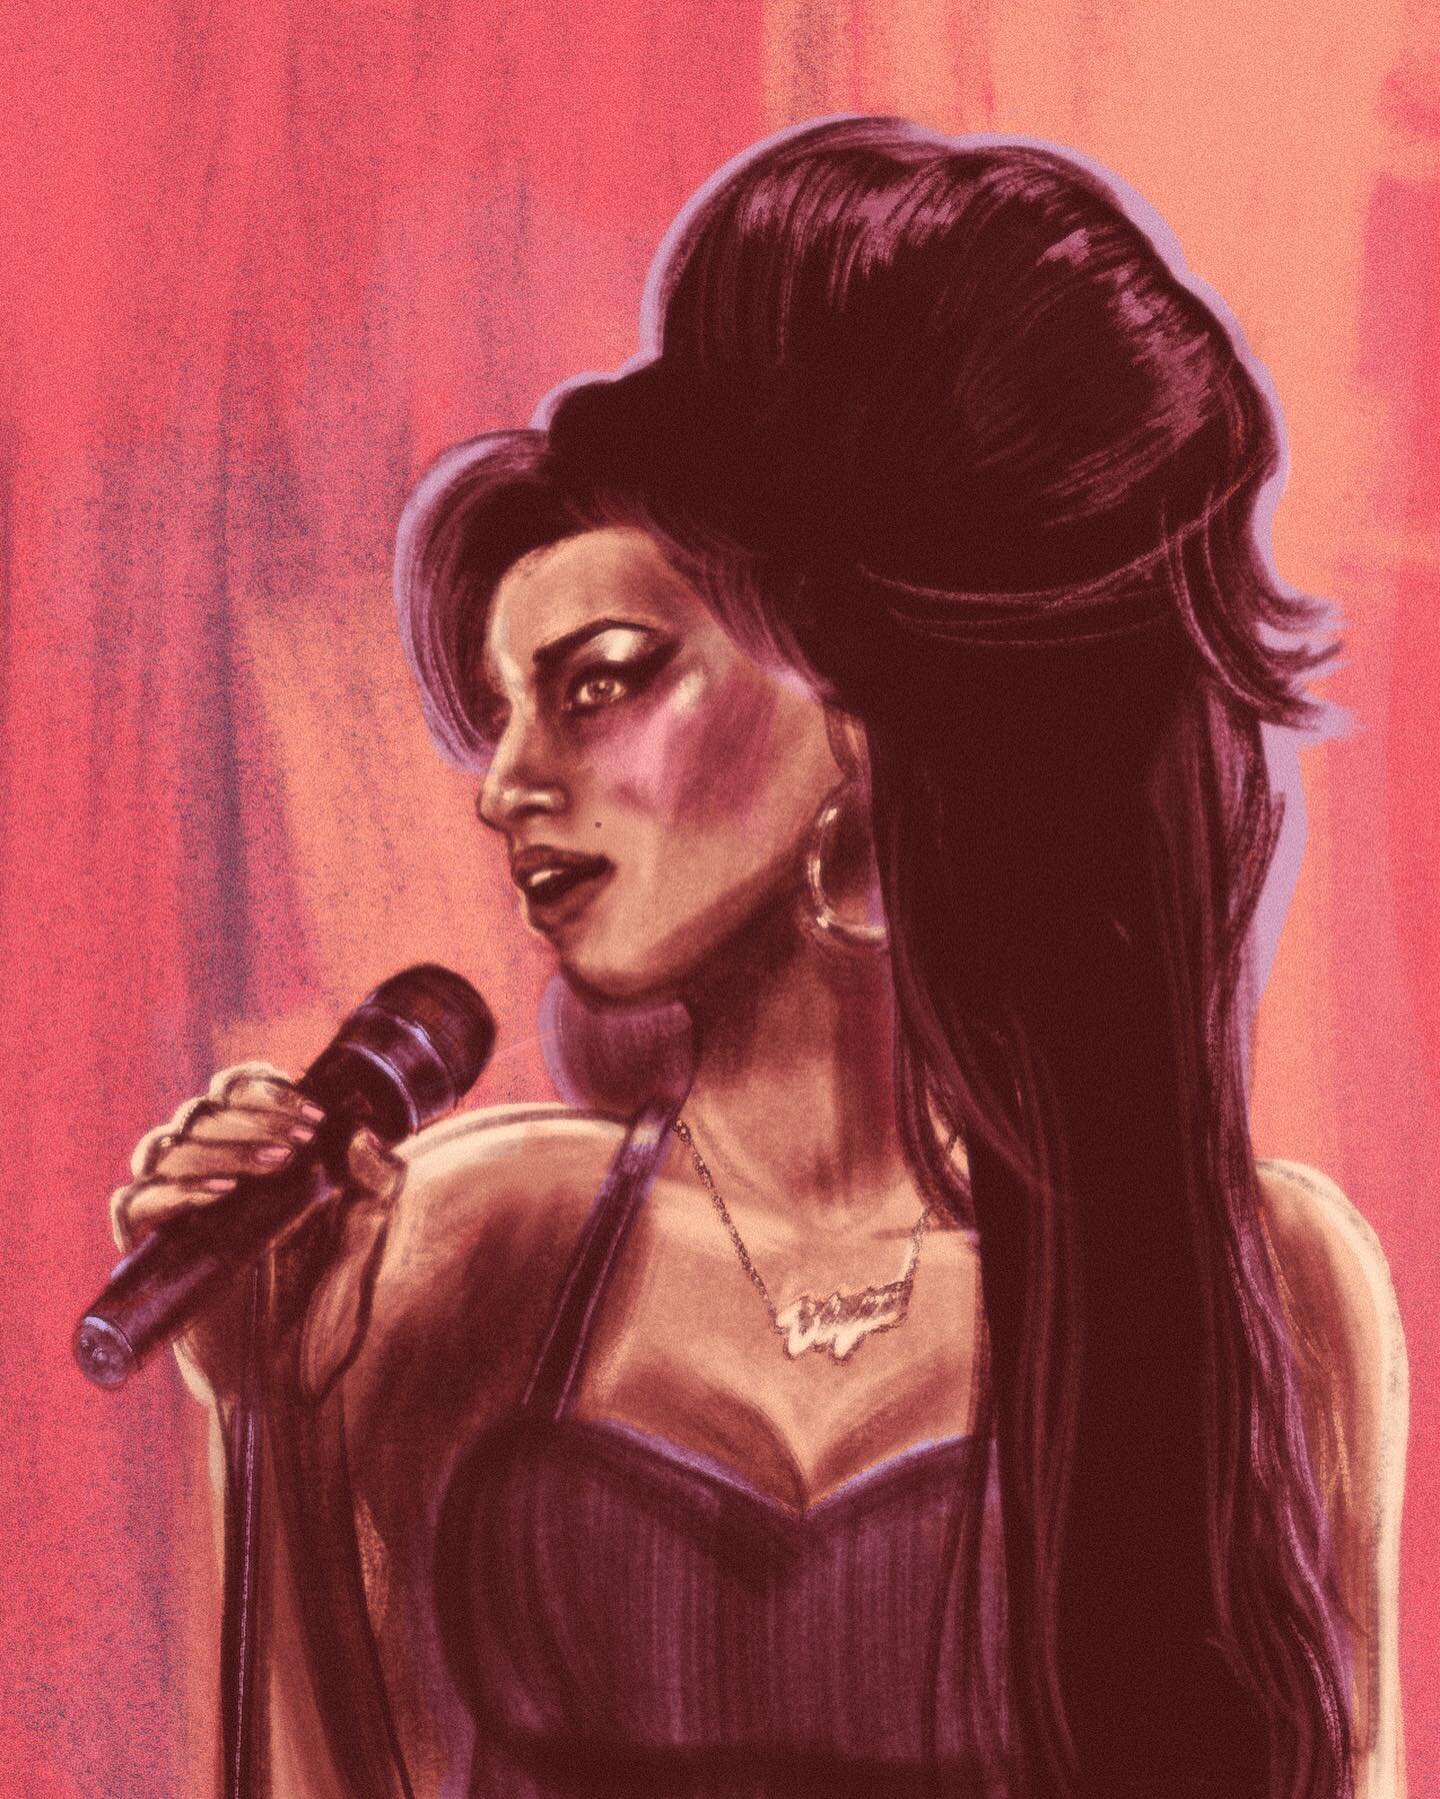 Amy Winehouse~✨

Shout out to Alan for being my art director and giving me such a great prompt, I had so much fun drawing this 🥰💜